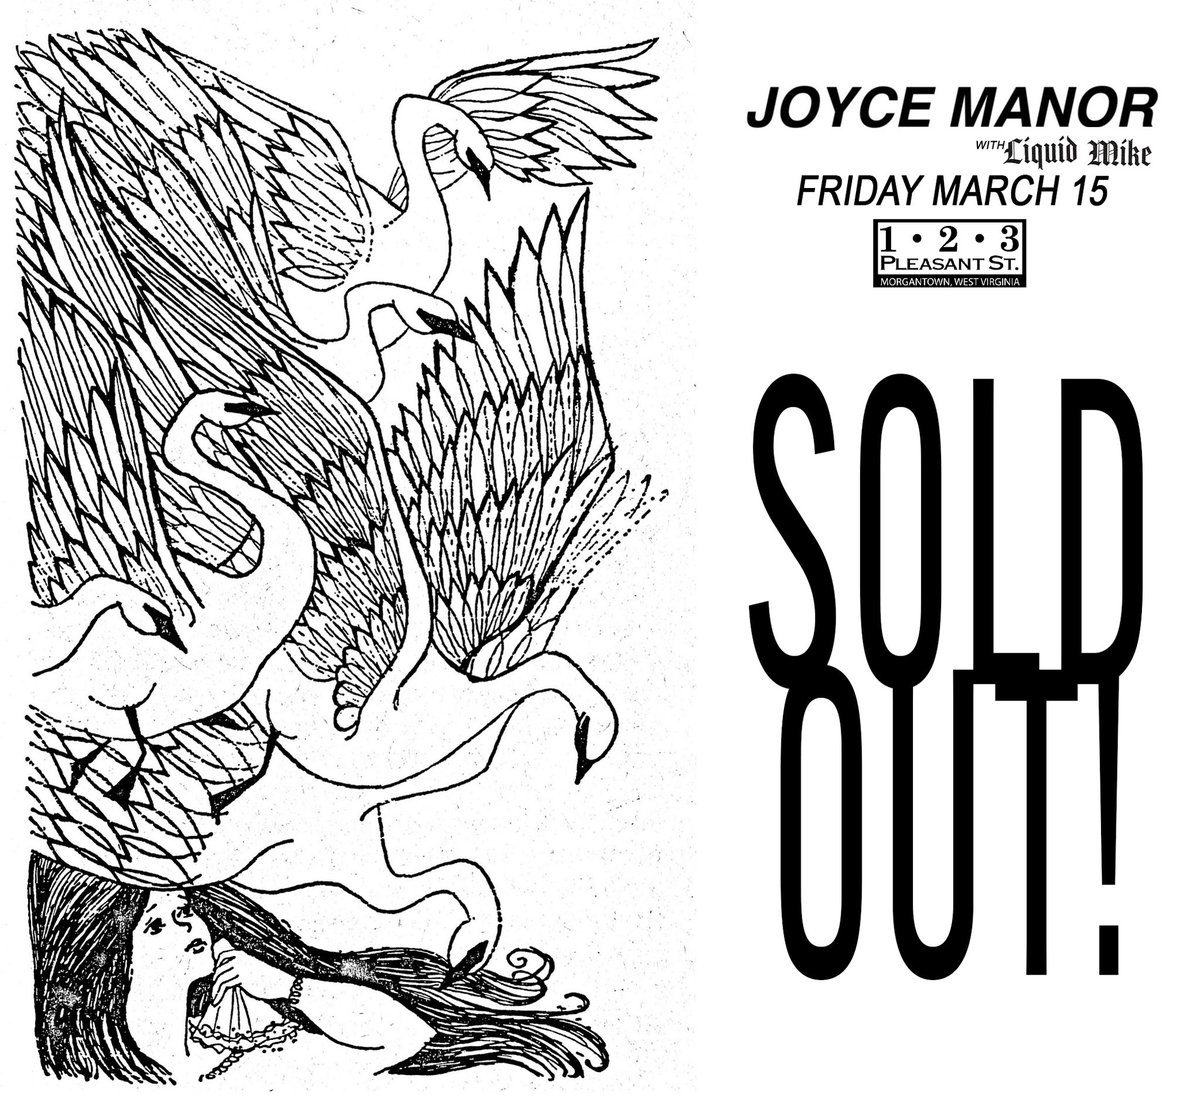 TONIGHT! @JoyceManor with @liquidmikeband Doors @ 8PM SOLD OUT!!